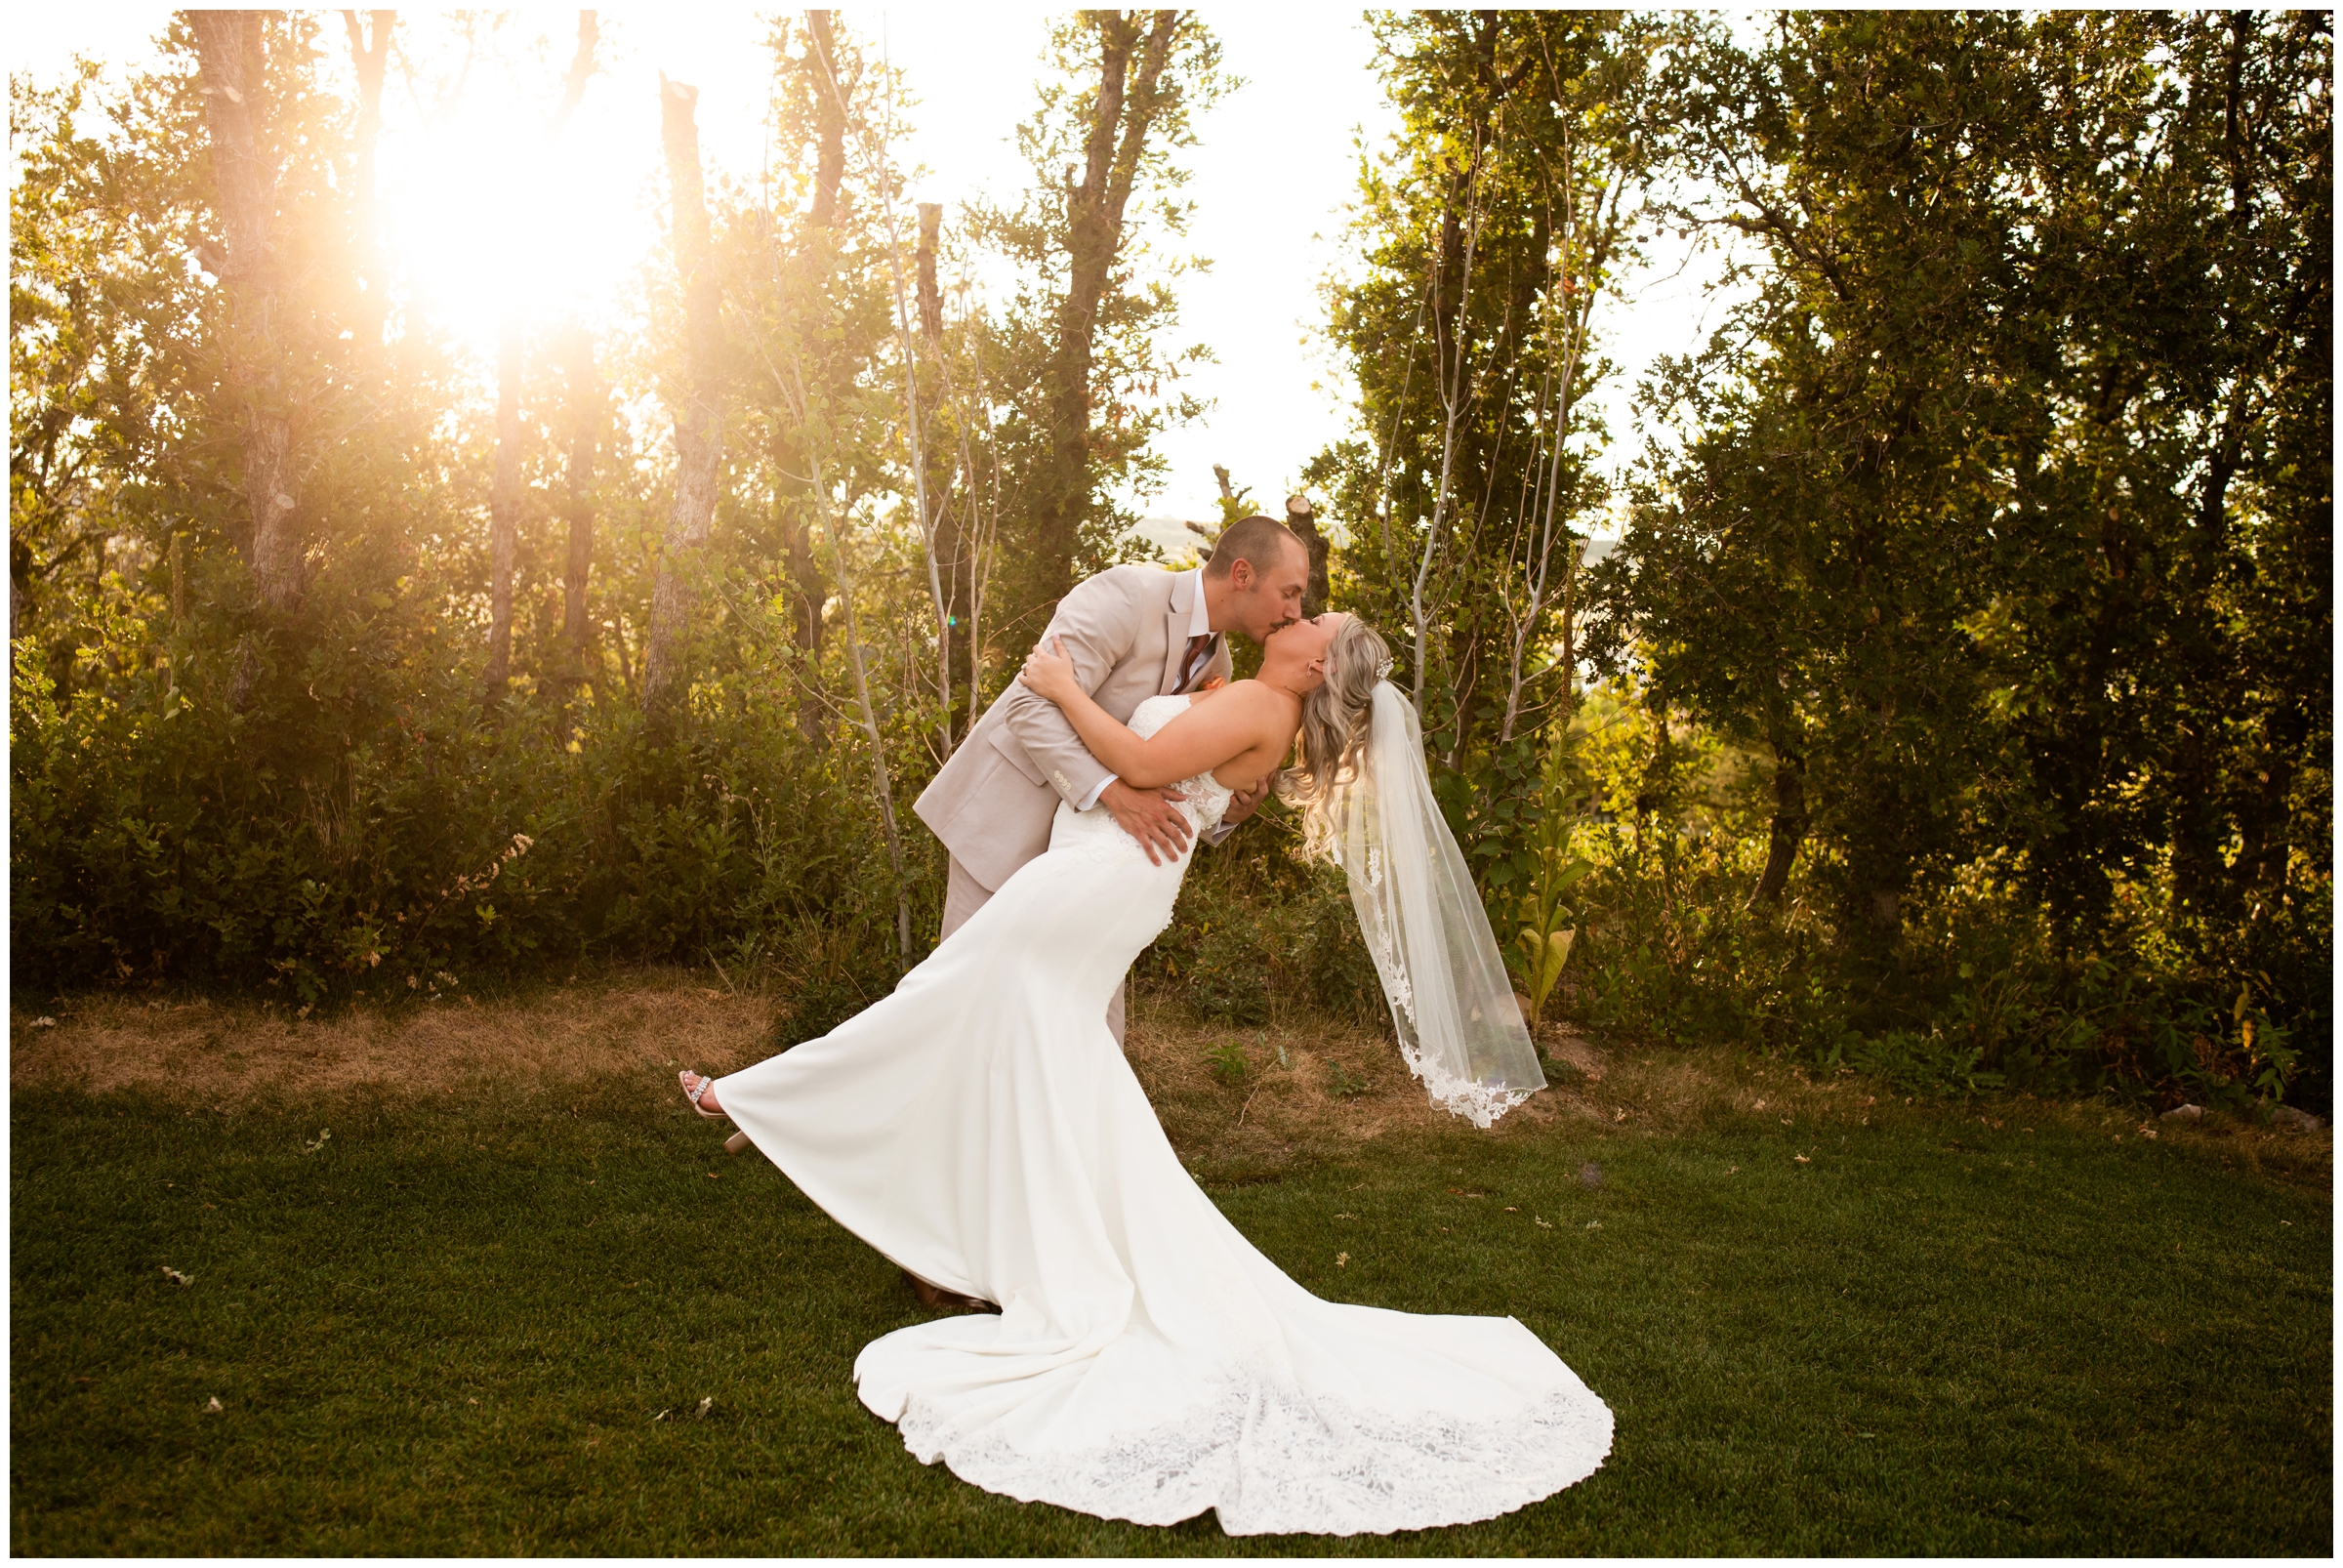 groom dipping bride with sun in the background during romantic wedding portraits at the Oaks at Plum Creek